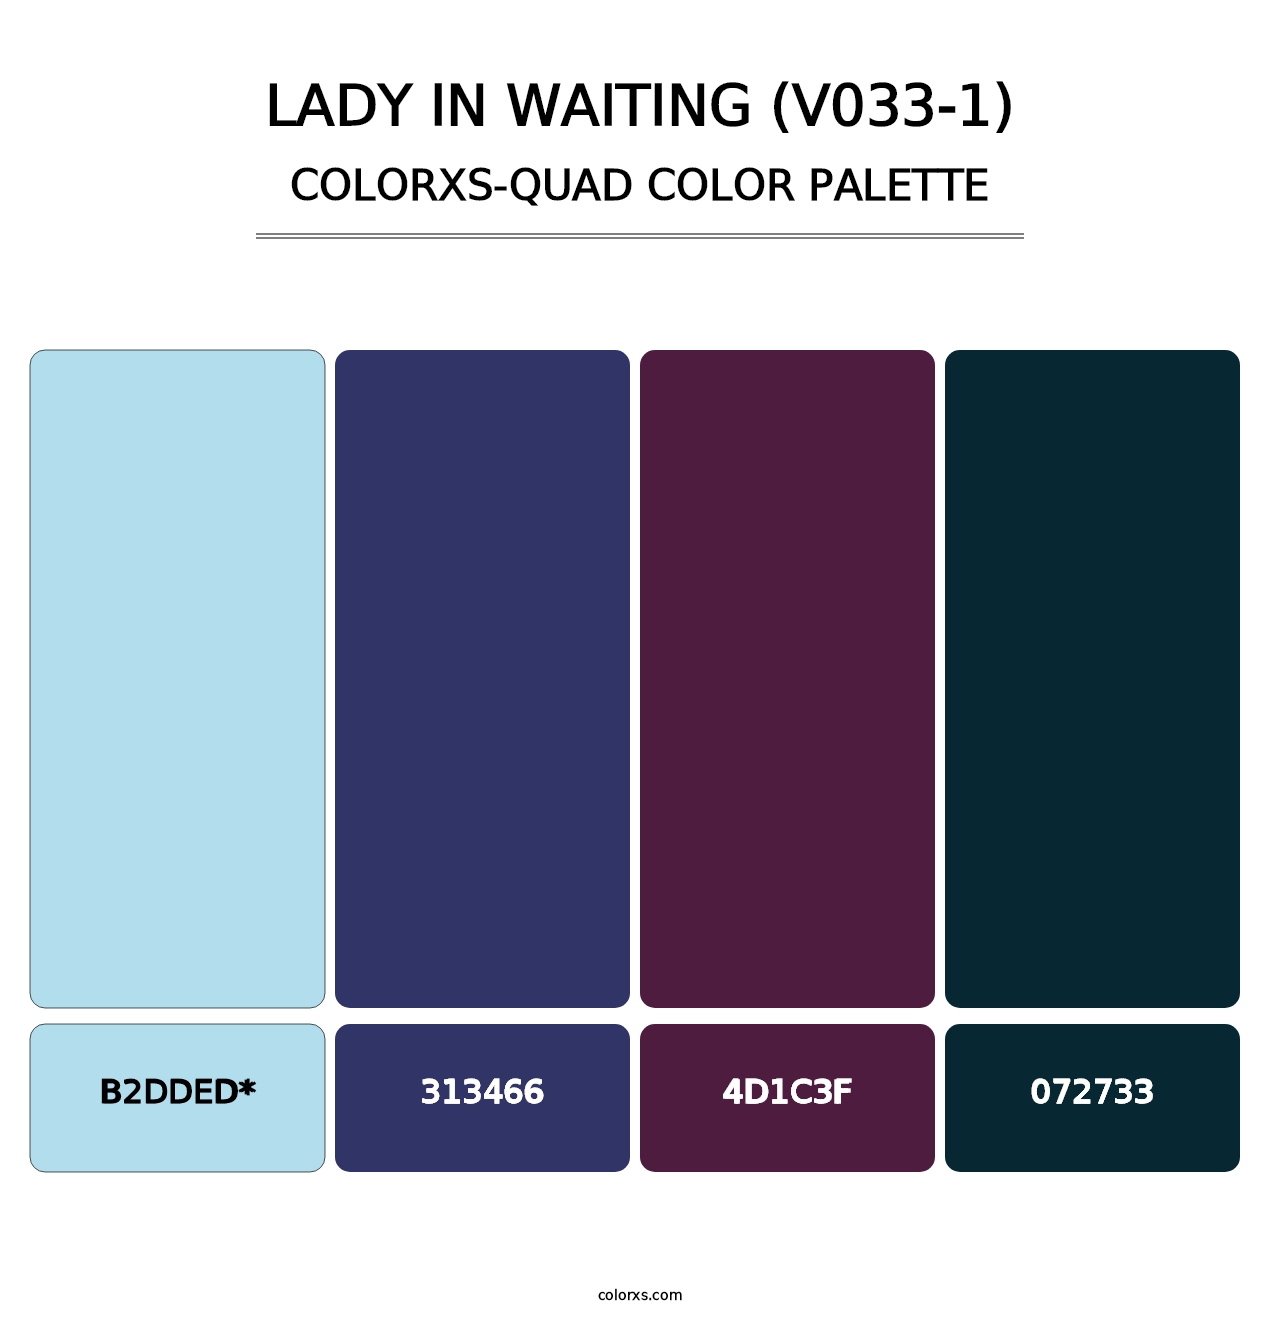 Lady in Waiting (V033-1) - Colorxs Quad Palette